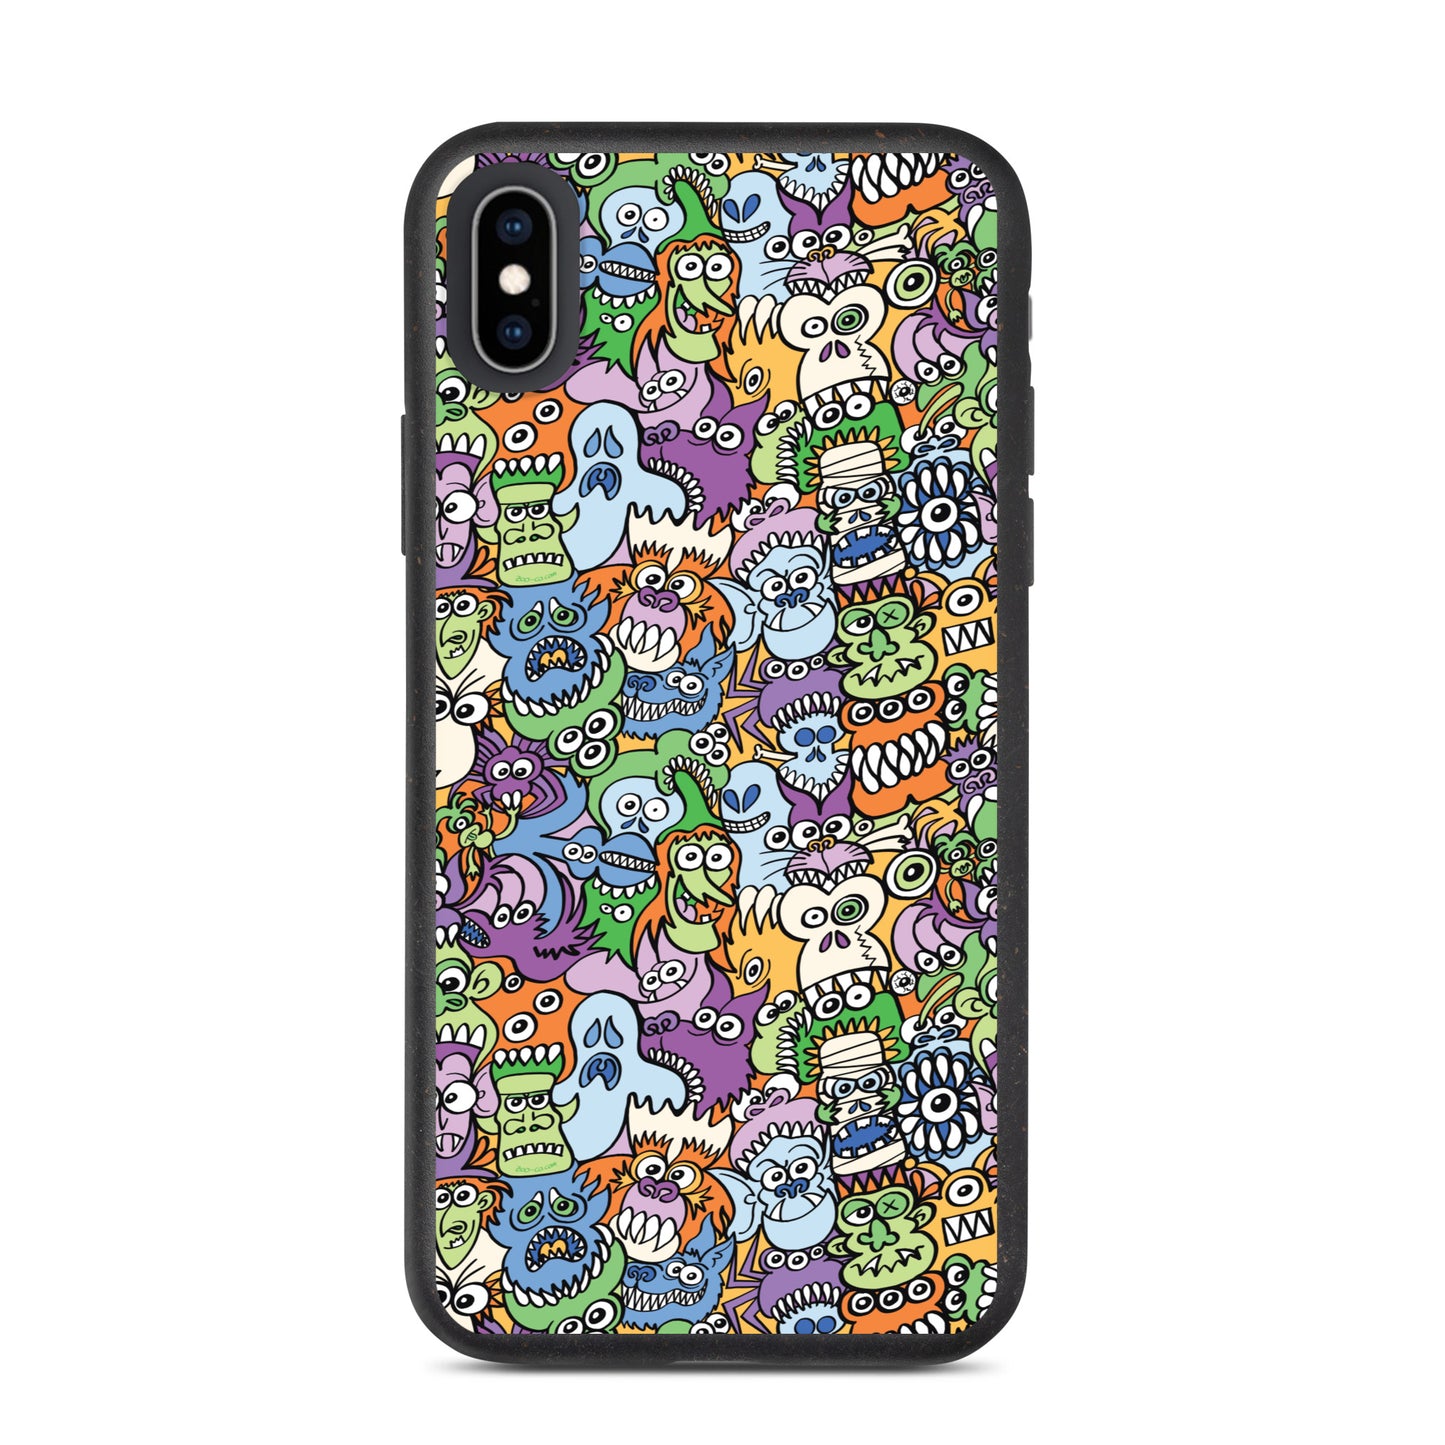 All the spooky Halloween monsters in a pattern design Speckled iPhone case. iphone xs max